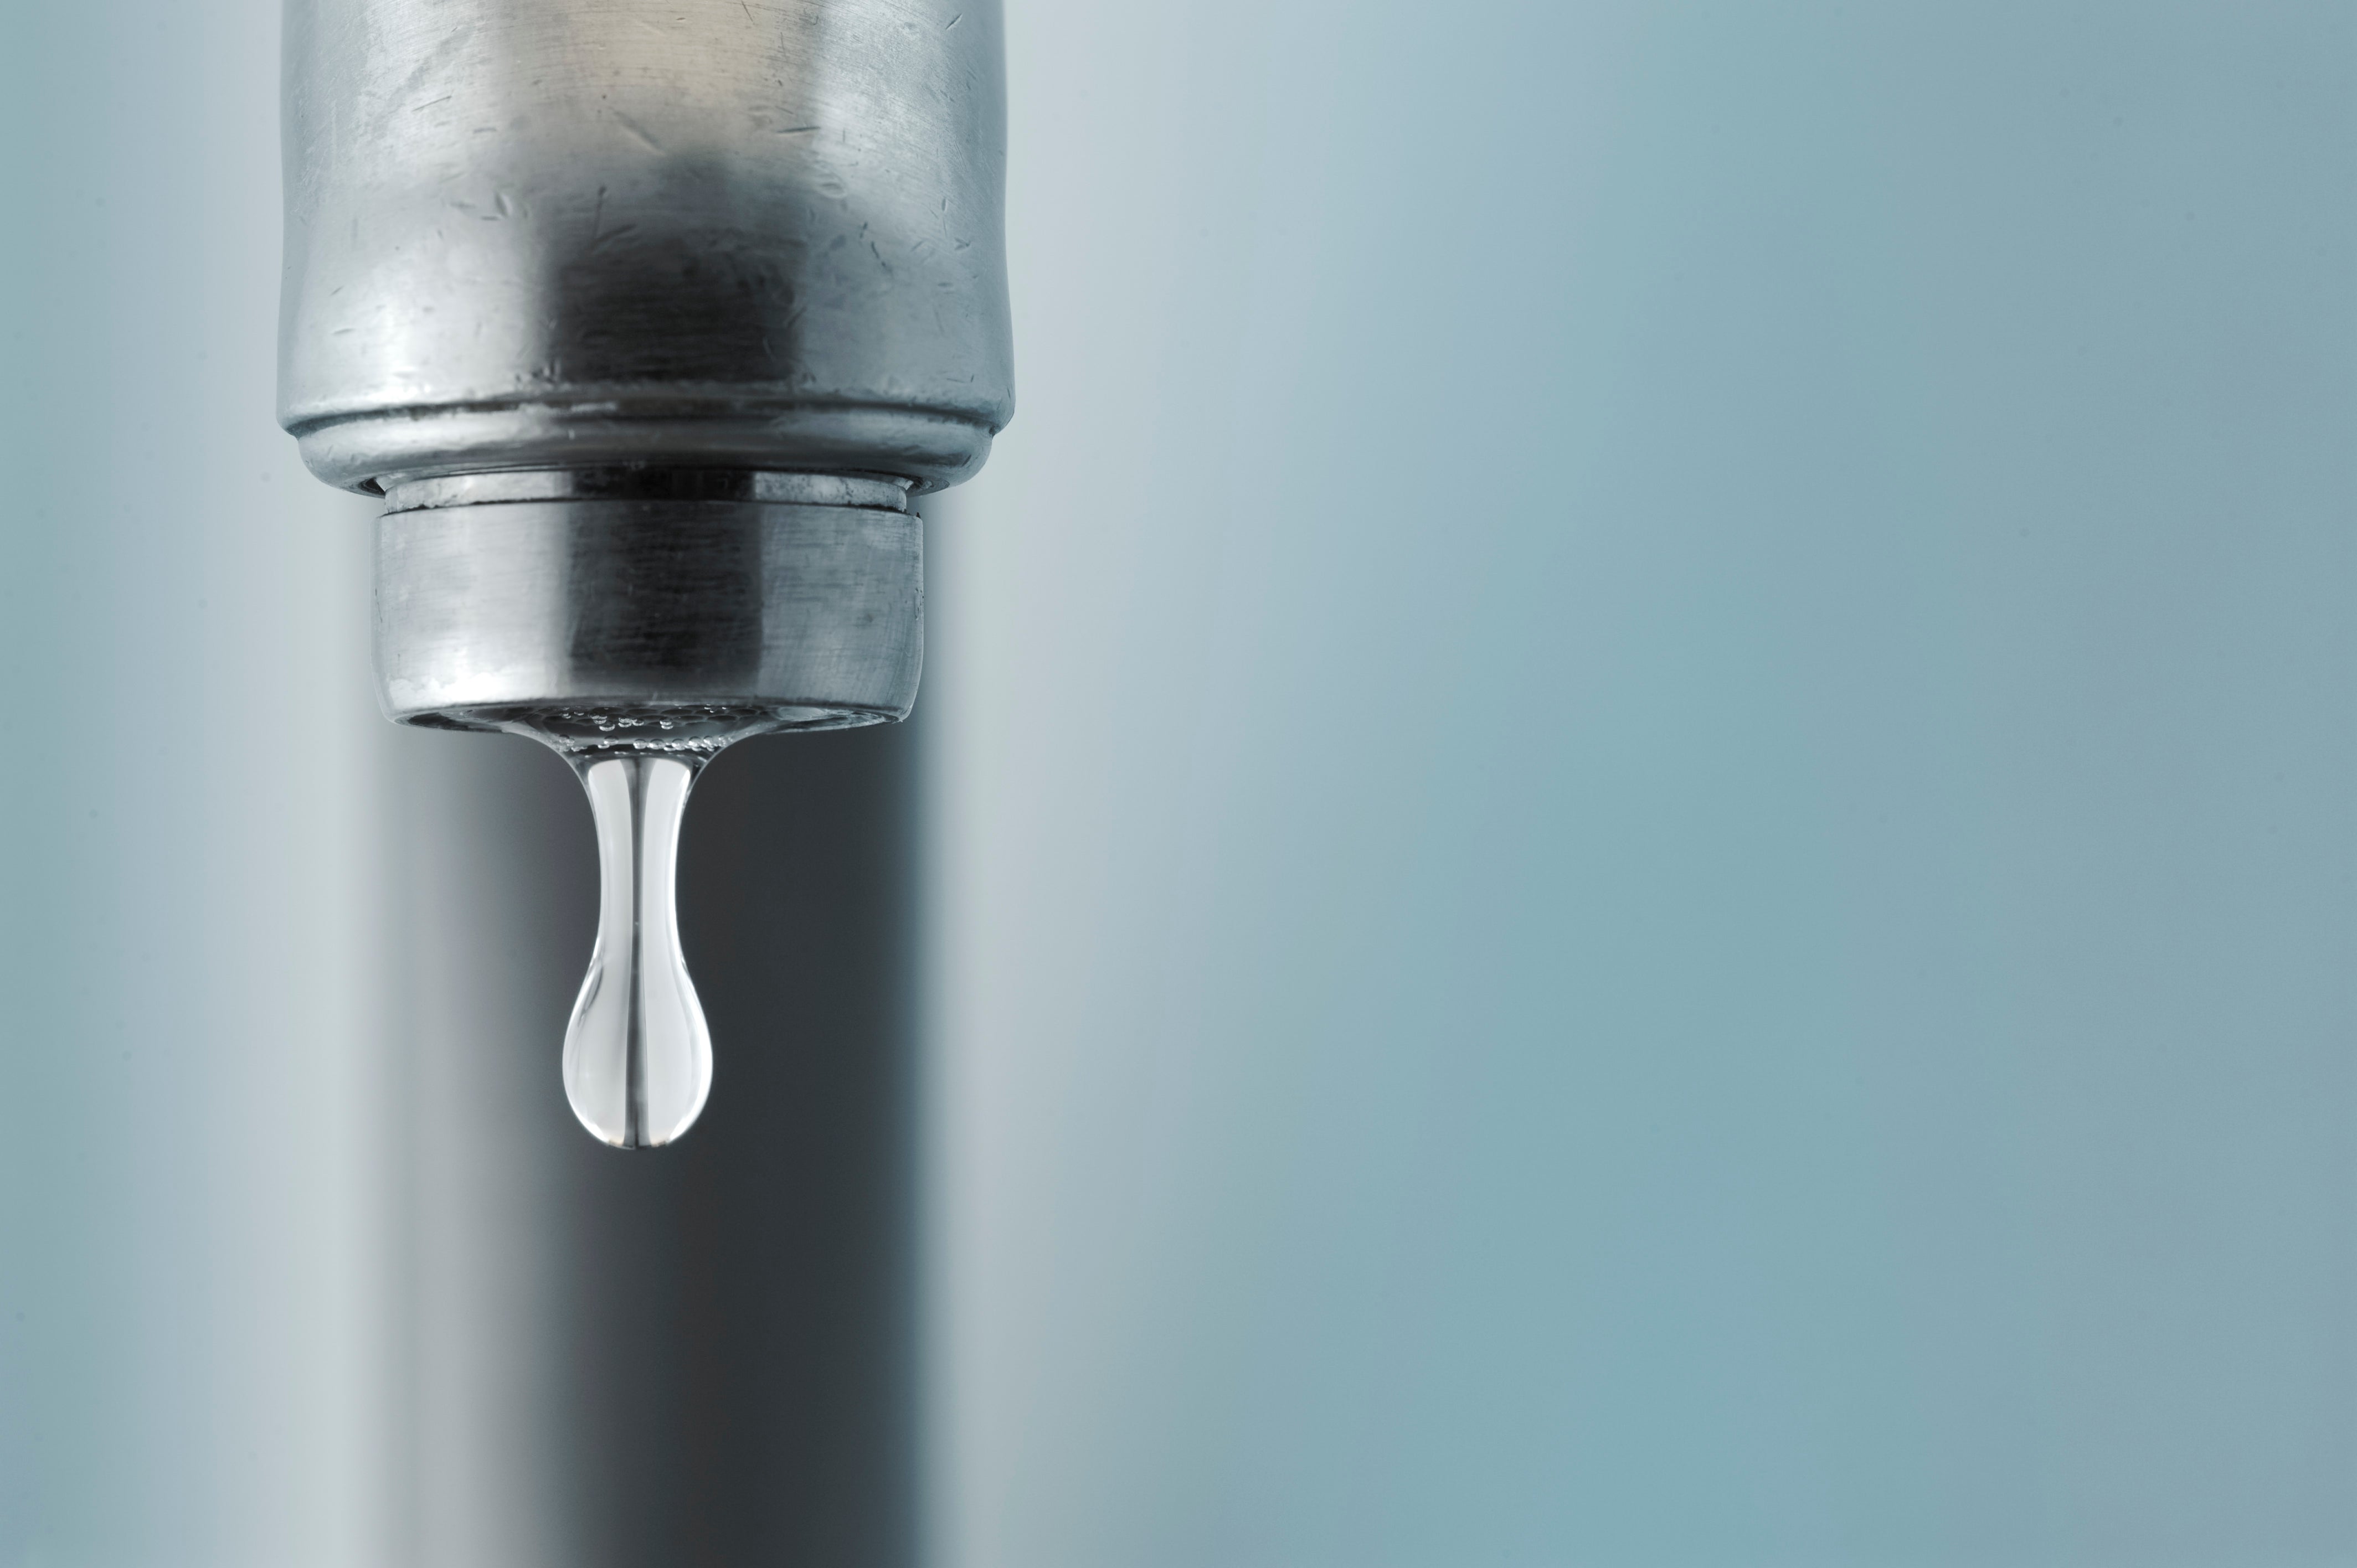 Drip feed: Slowly, businesses are realising the impact water efficiency can have